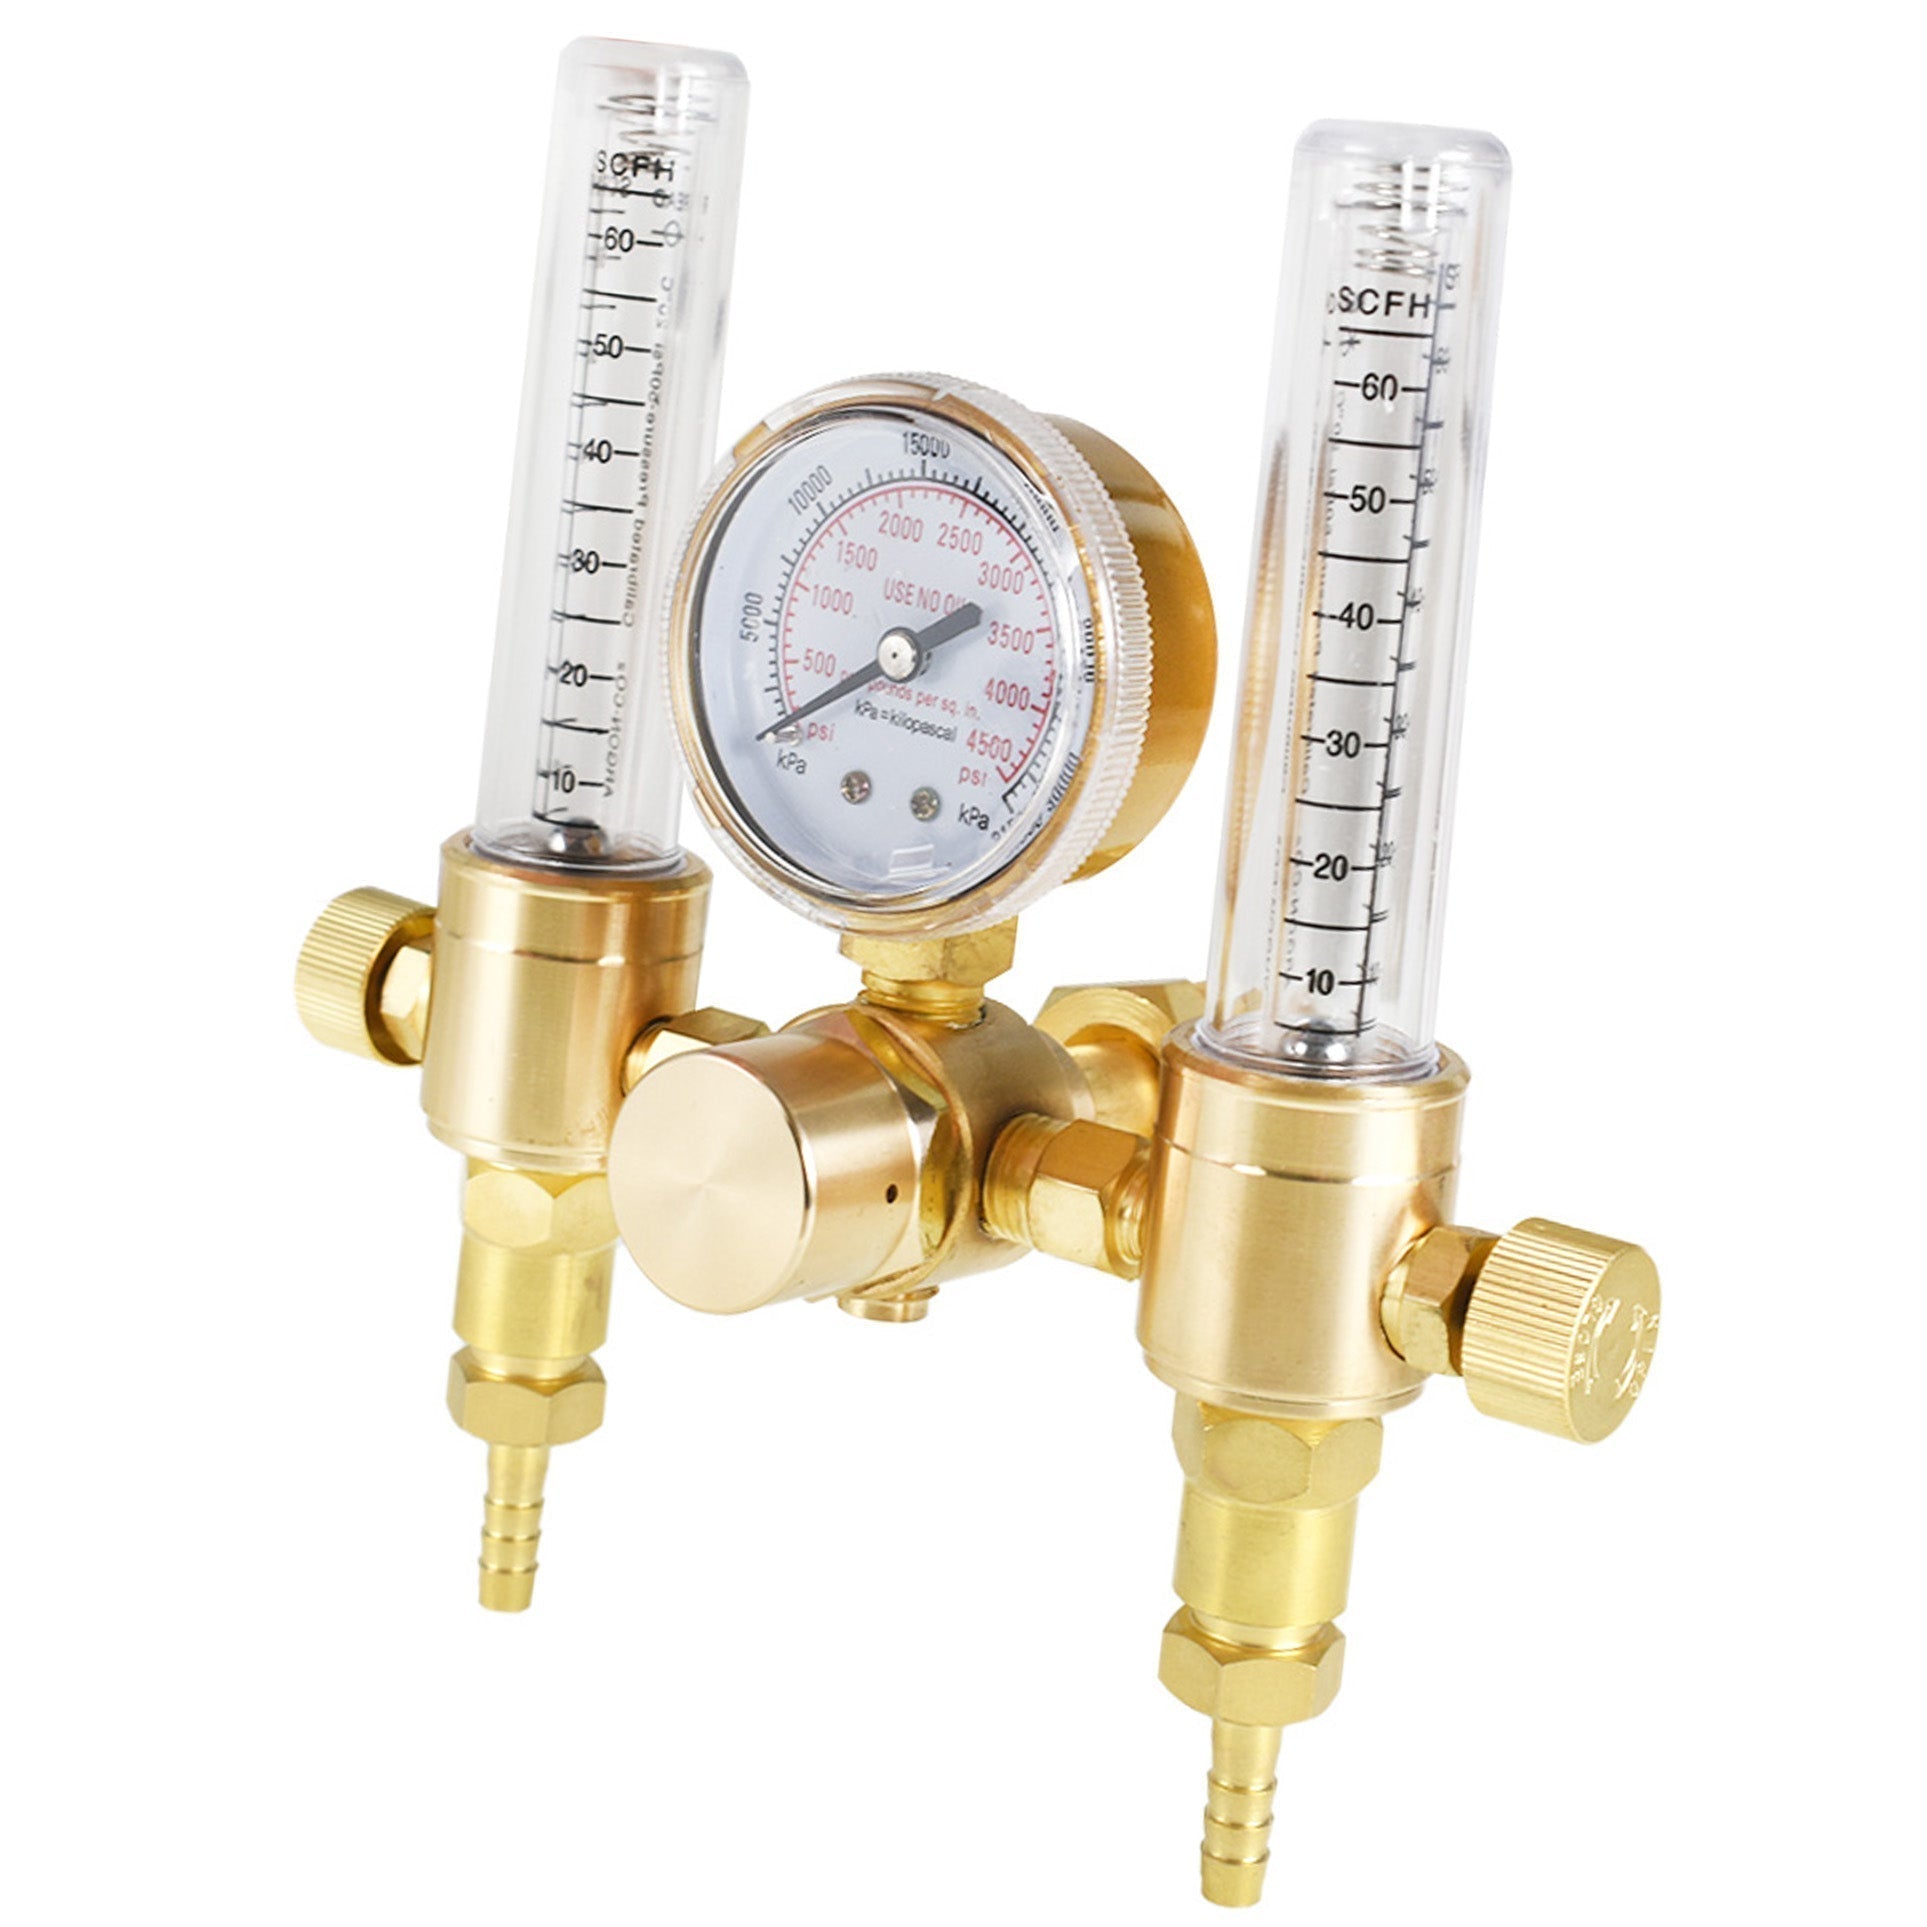 findmall  Dual Output Argon MIG TIG Flow Meter Regulator 0-60CFH Output Flow CGA580 Inlet Connection 5/8Inch UNF-18RH Outlet FINDMALLPARTS